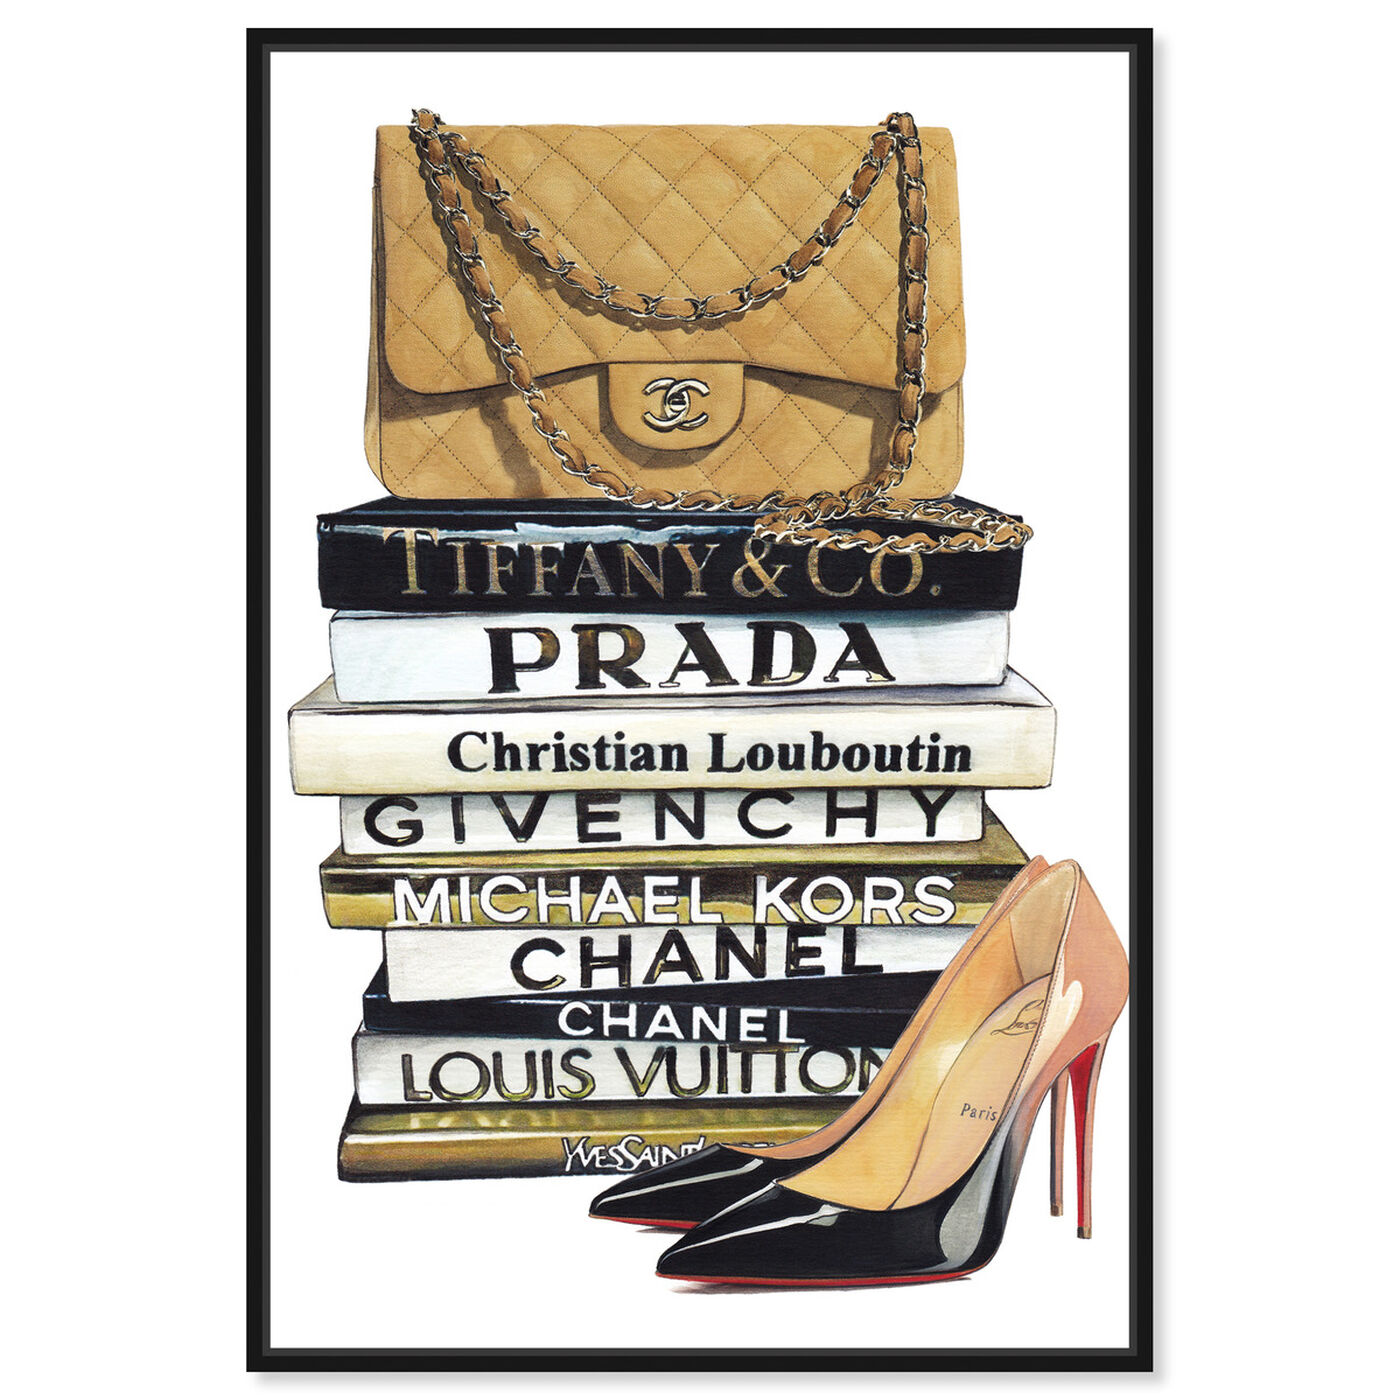 Oliver Gal 'LV Gold' Fashion and Glam Wall Art Canvas Print - Gold